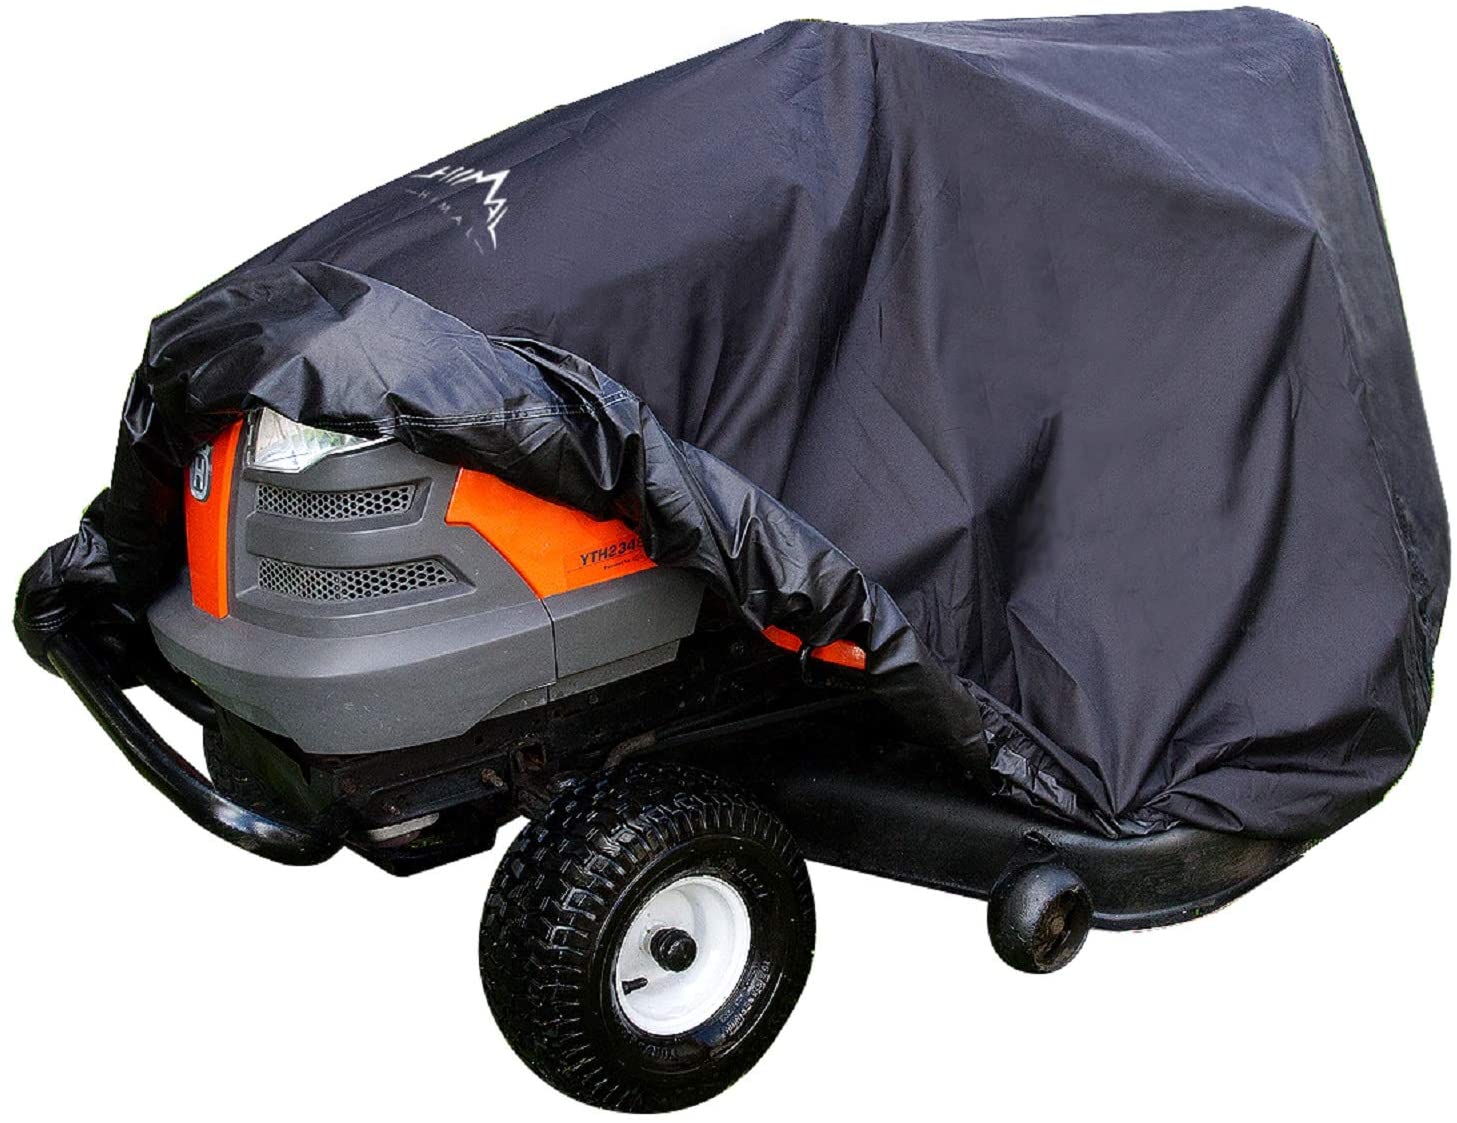 Universal Fit for Up to 72 XGT2H Brightent Waterproof Lawn Mower Cover Heavy Duty 600D Marine Grade Fabric 